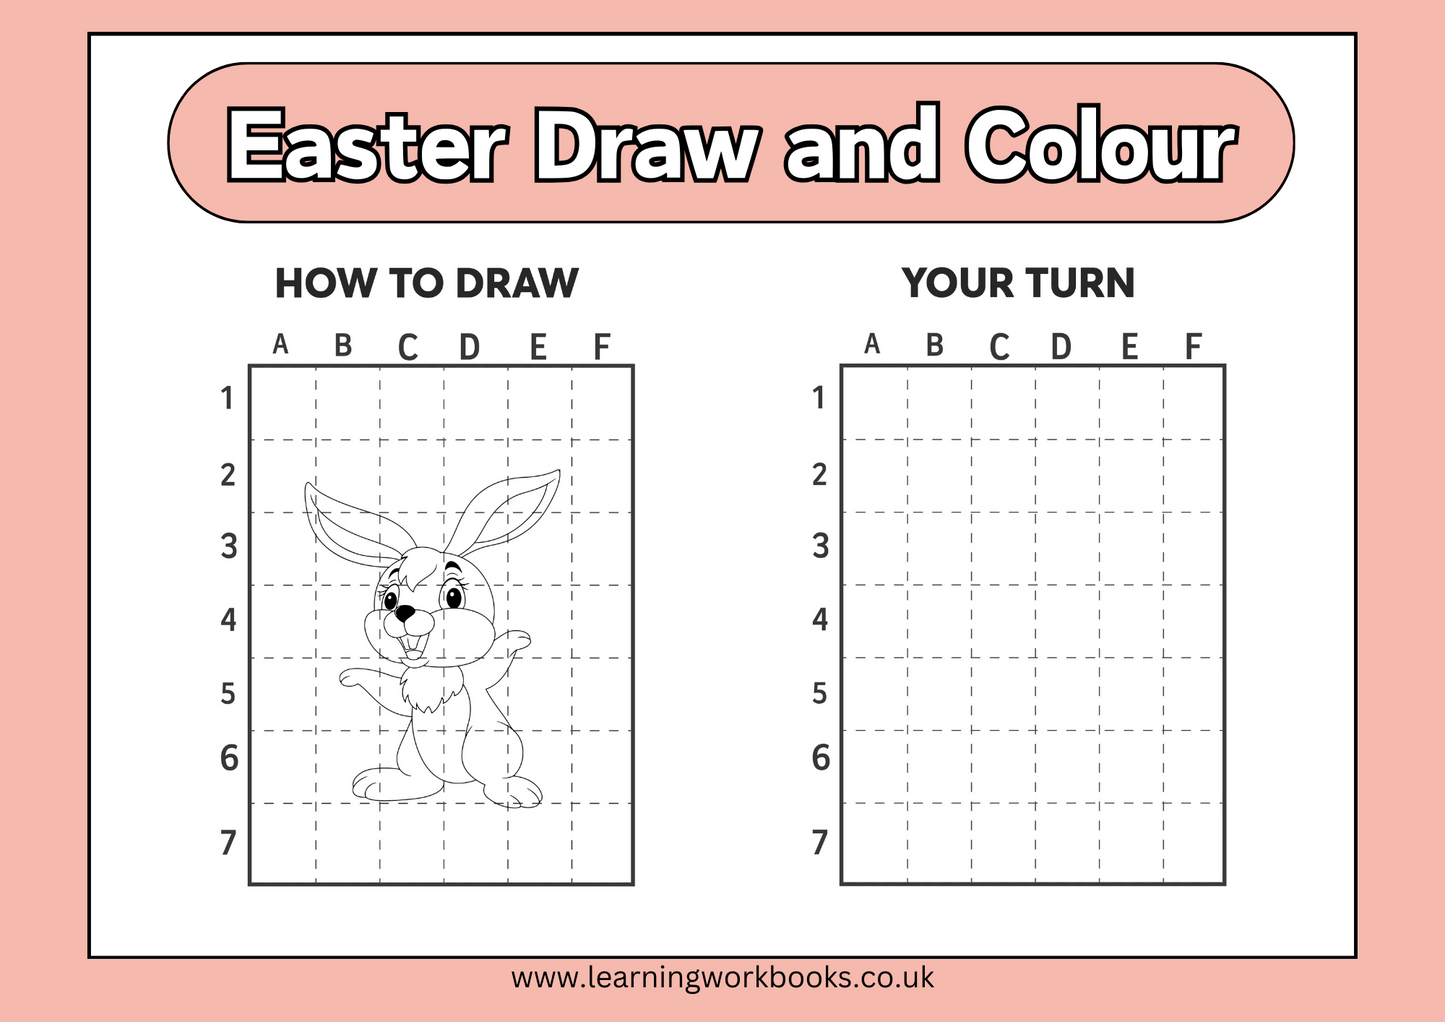 Easter Draw and Colour Book 1